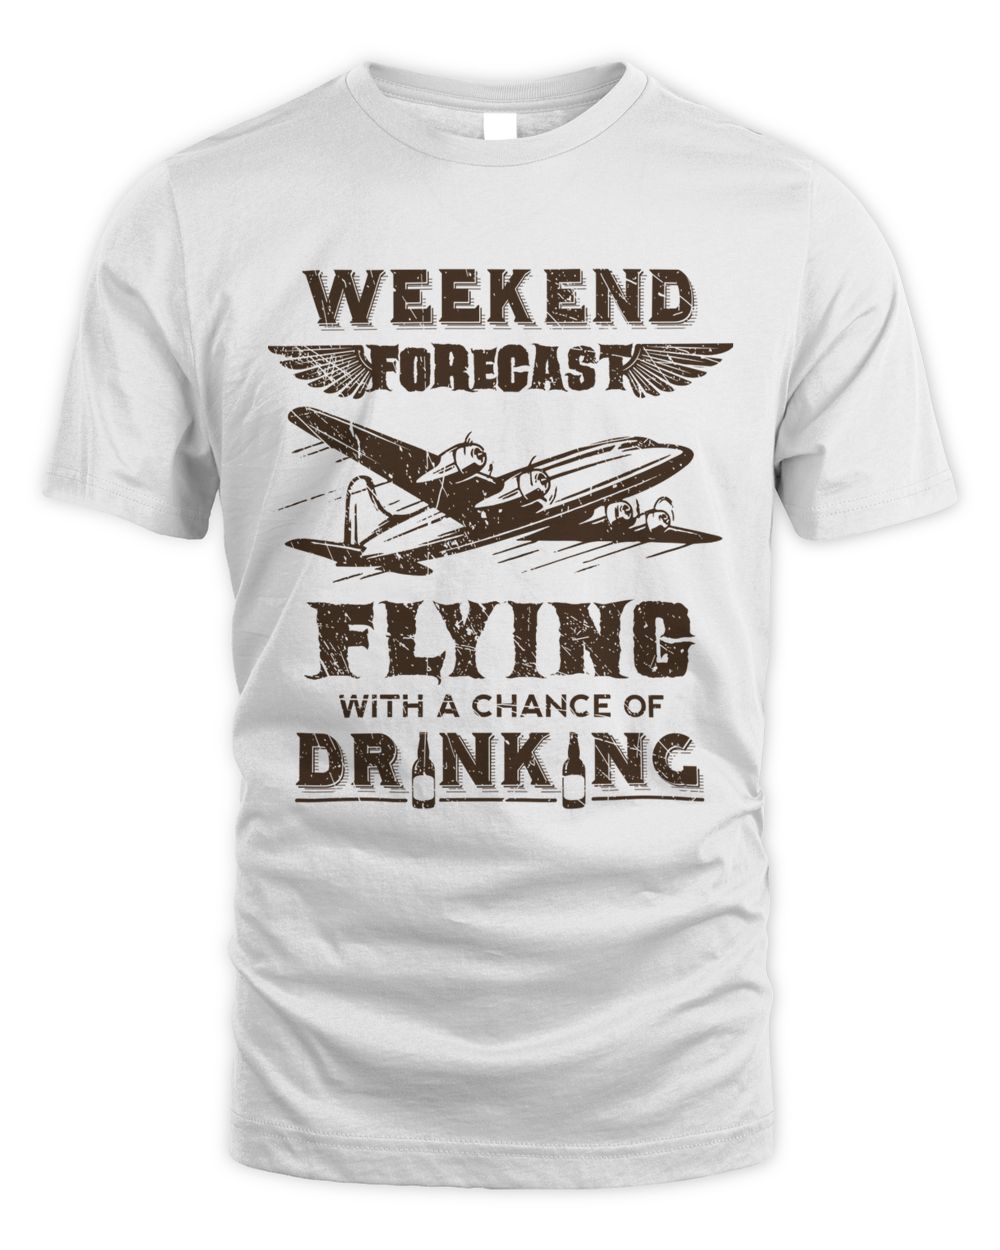 Weekend forecast flying with a chance of drinking Unisex Standard T-Shirt white 